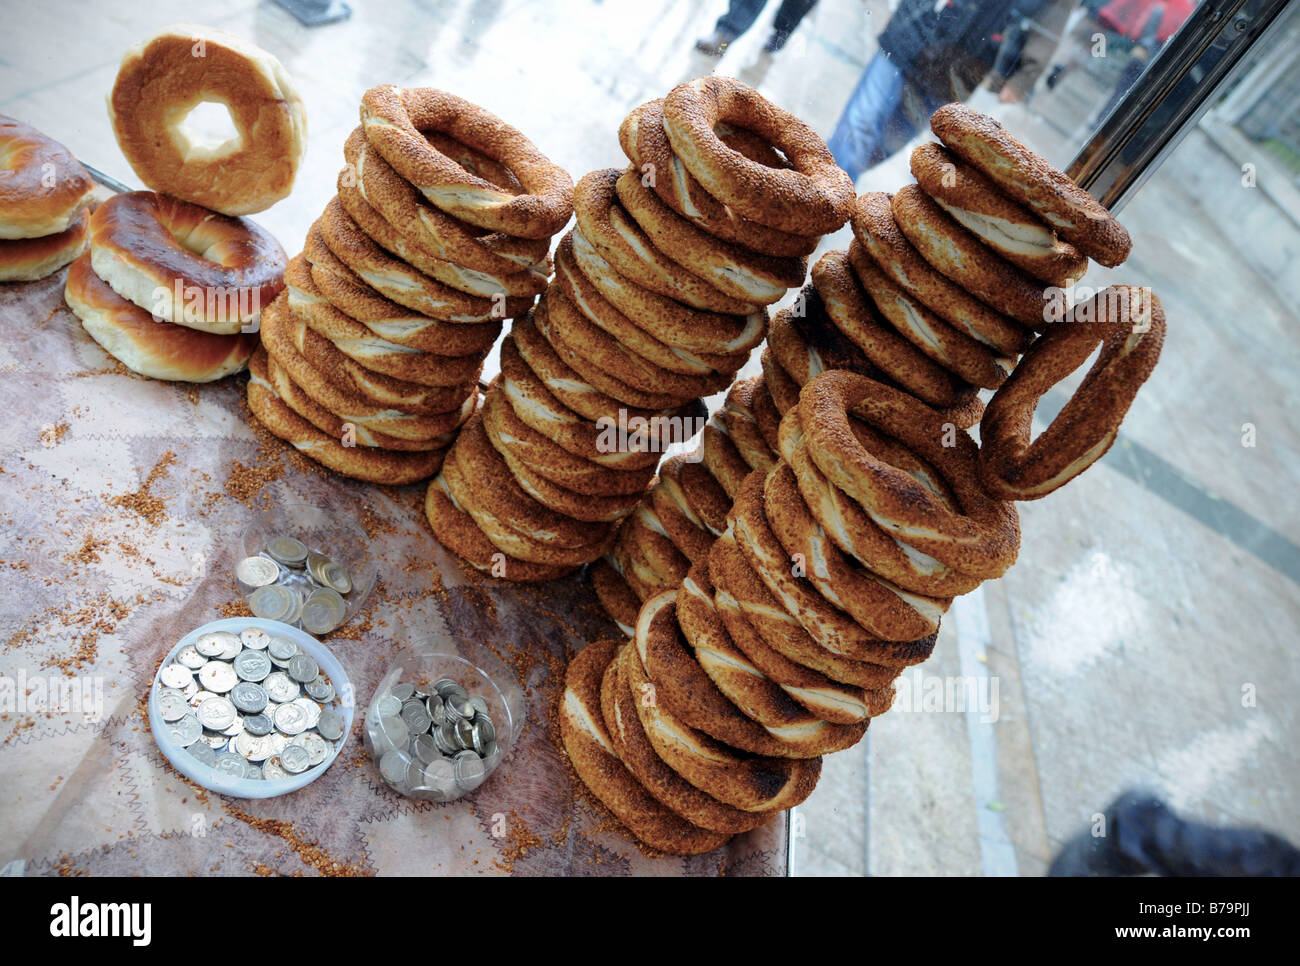 The traditional Turkish bread, Simit, for sale on the streets of Sultanahmet, Istanbul, Turkey. Stock Photo